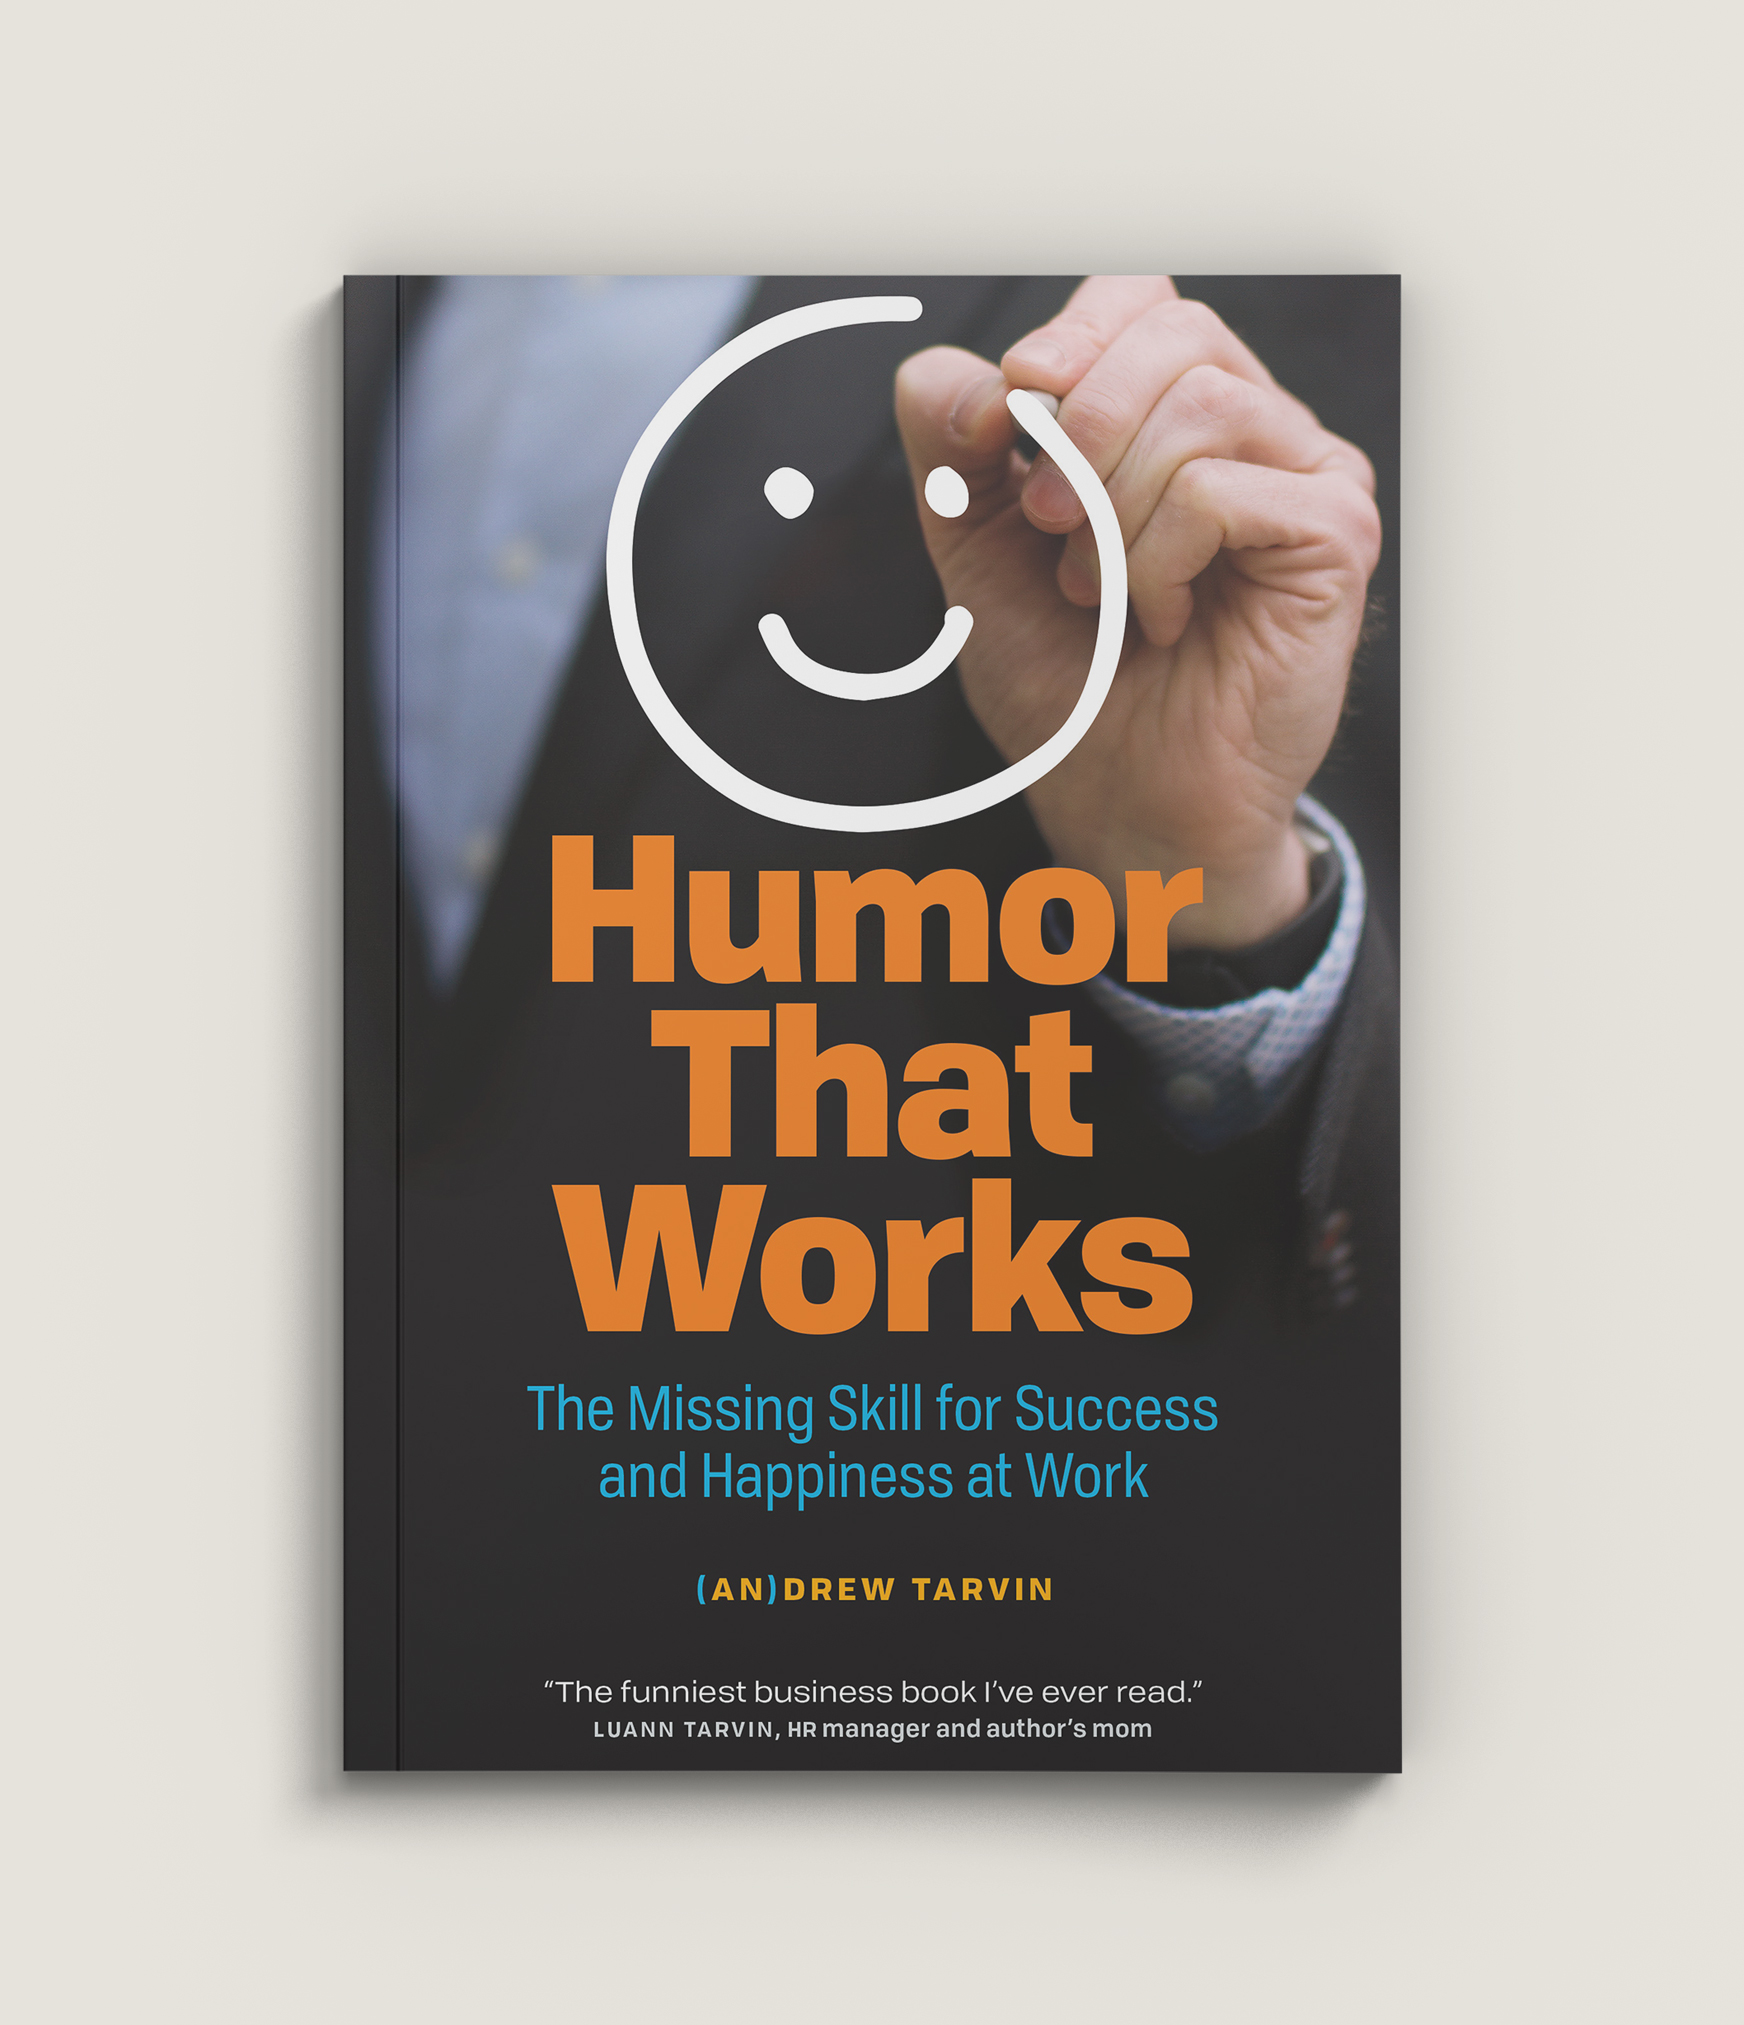 humor-that-works-cover-andrew-tarvin-humor-engineer